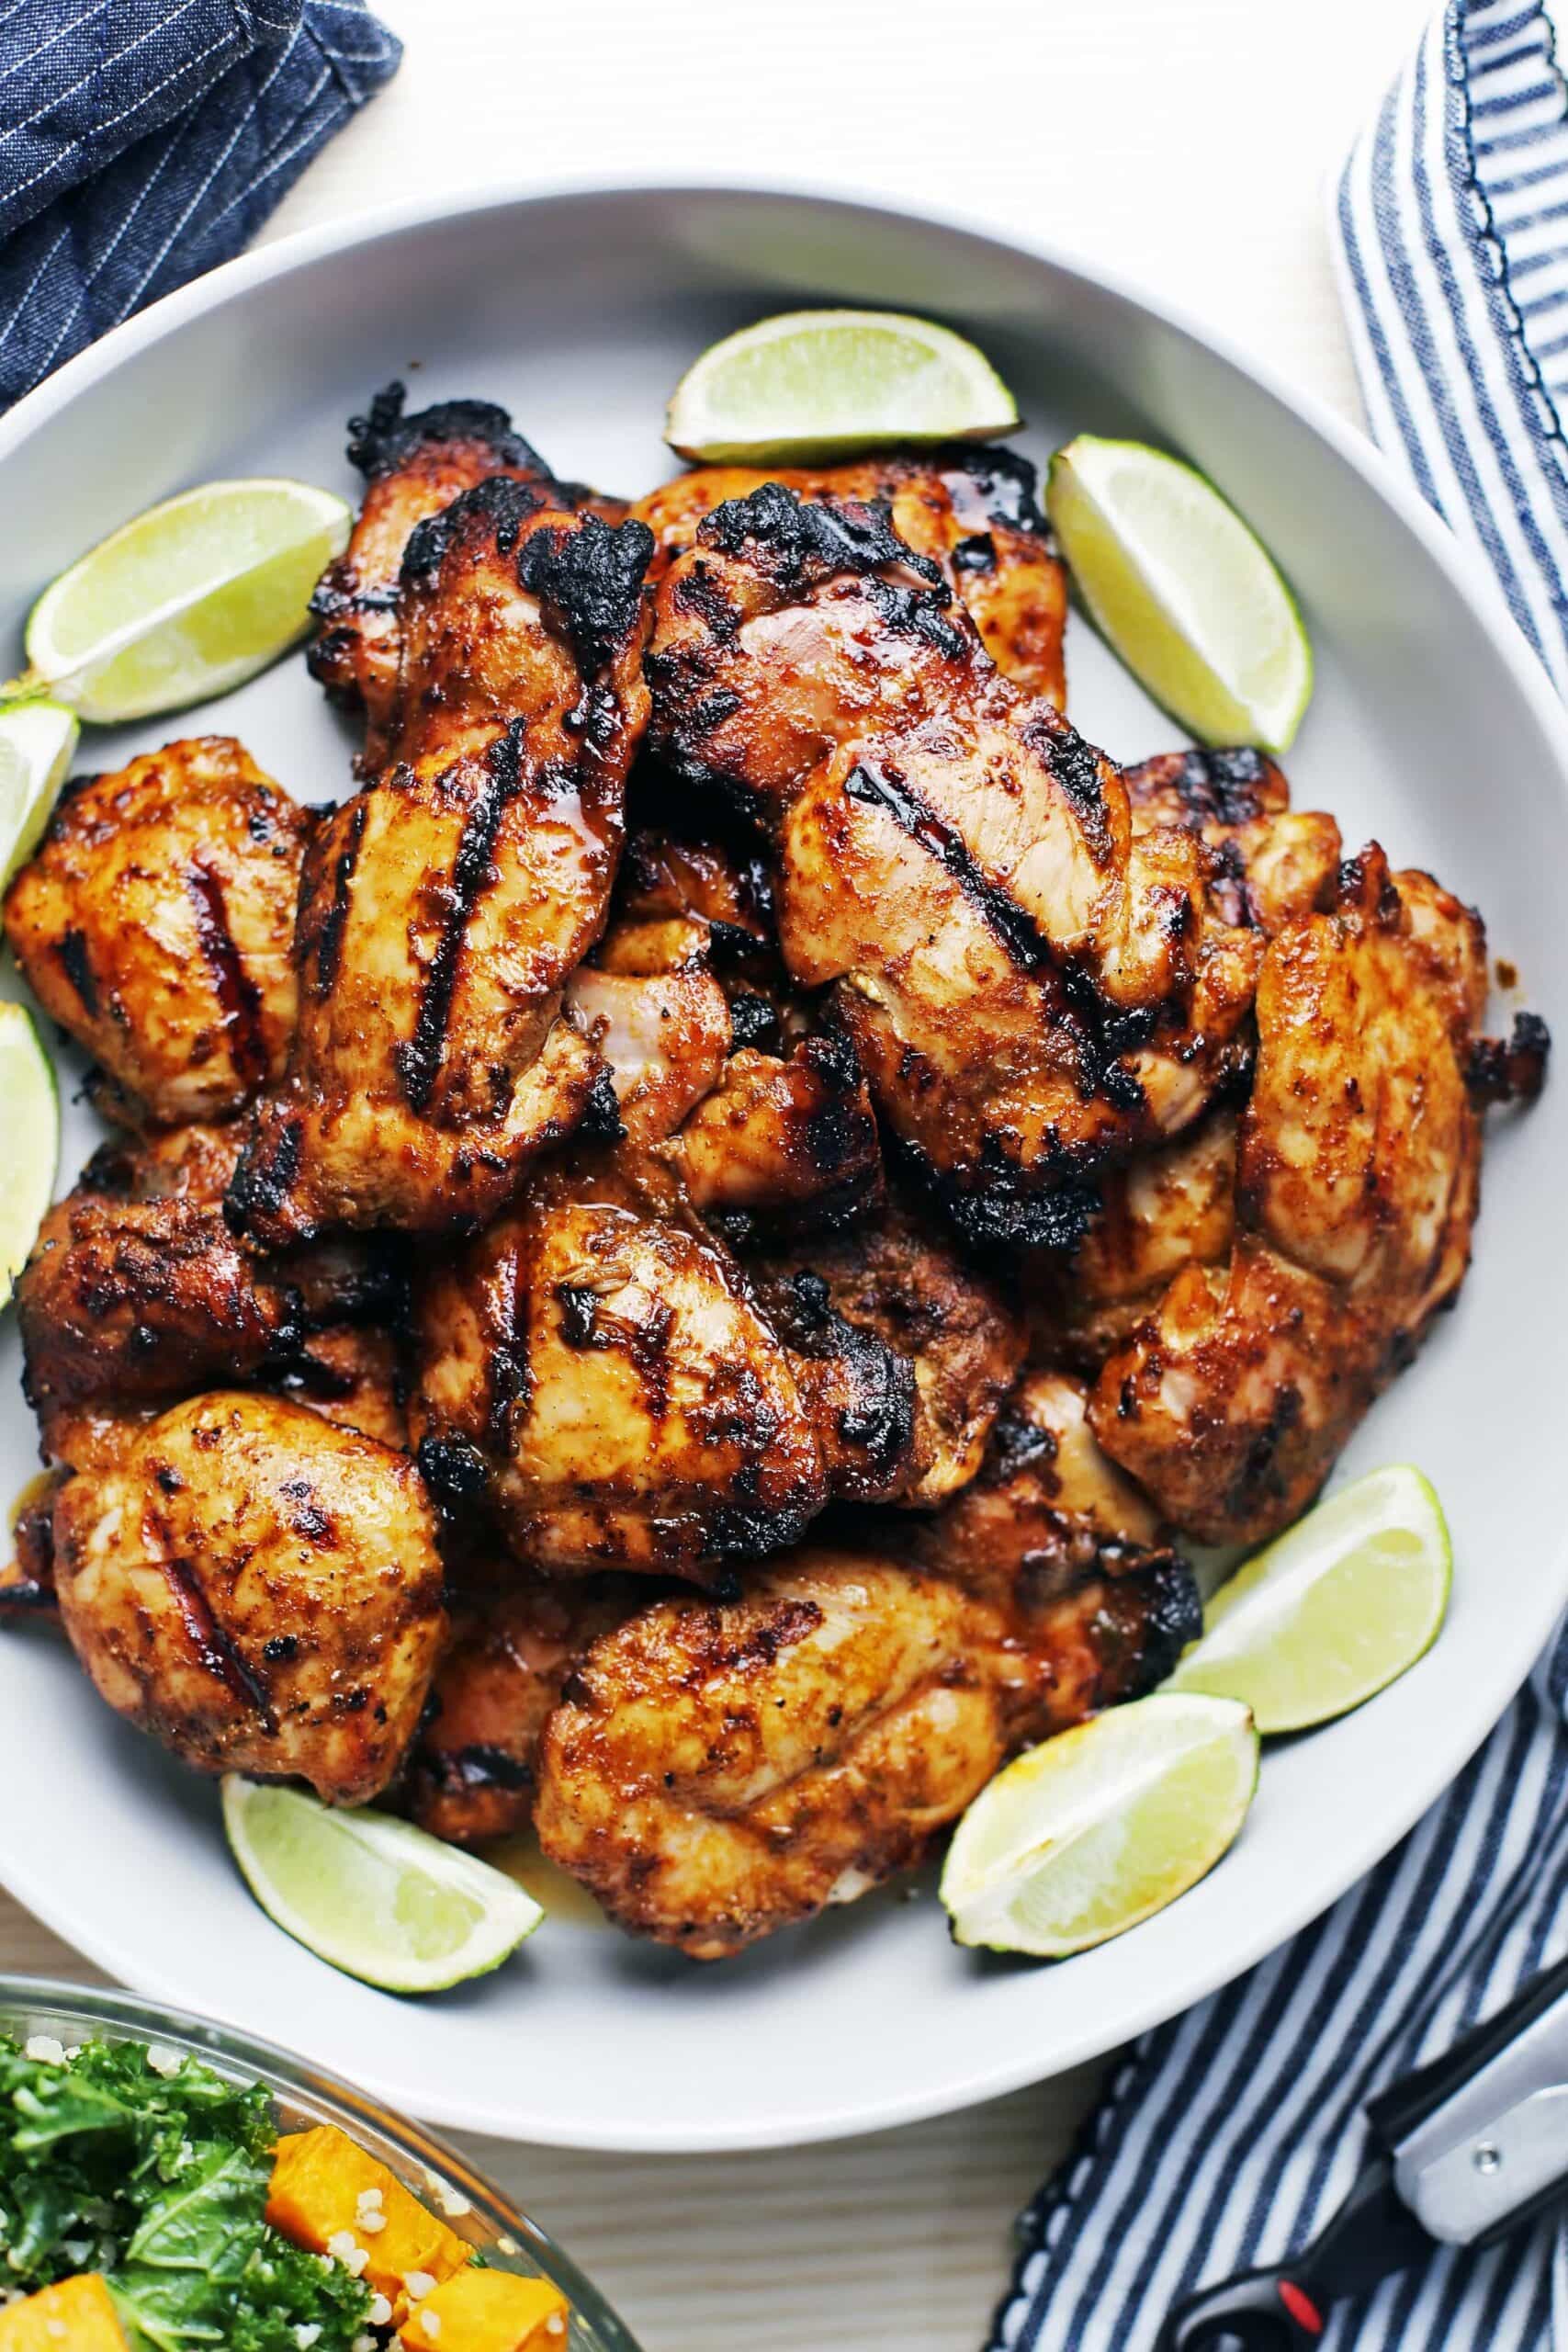 Grilled Chili Lime Chicken Thighs